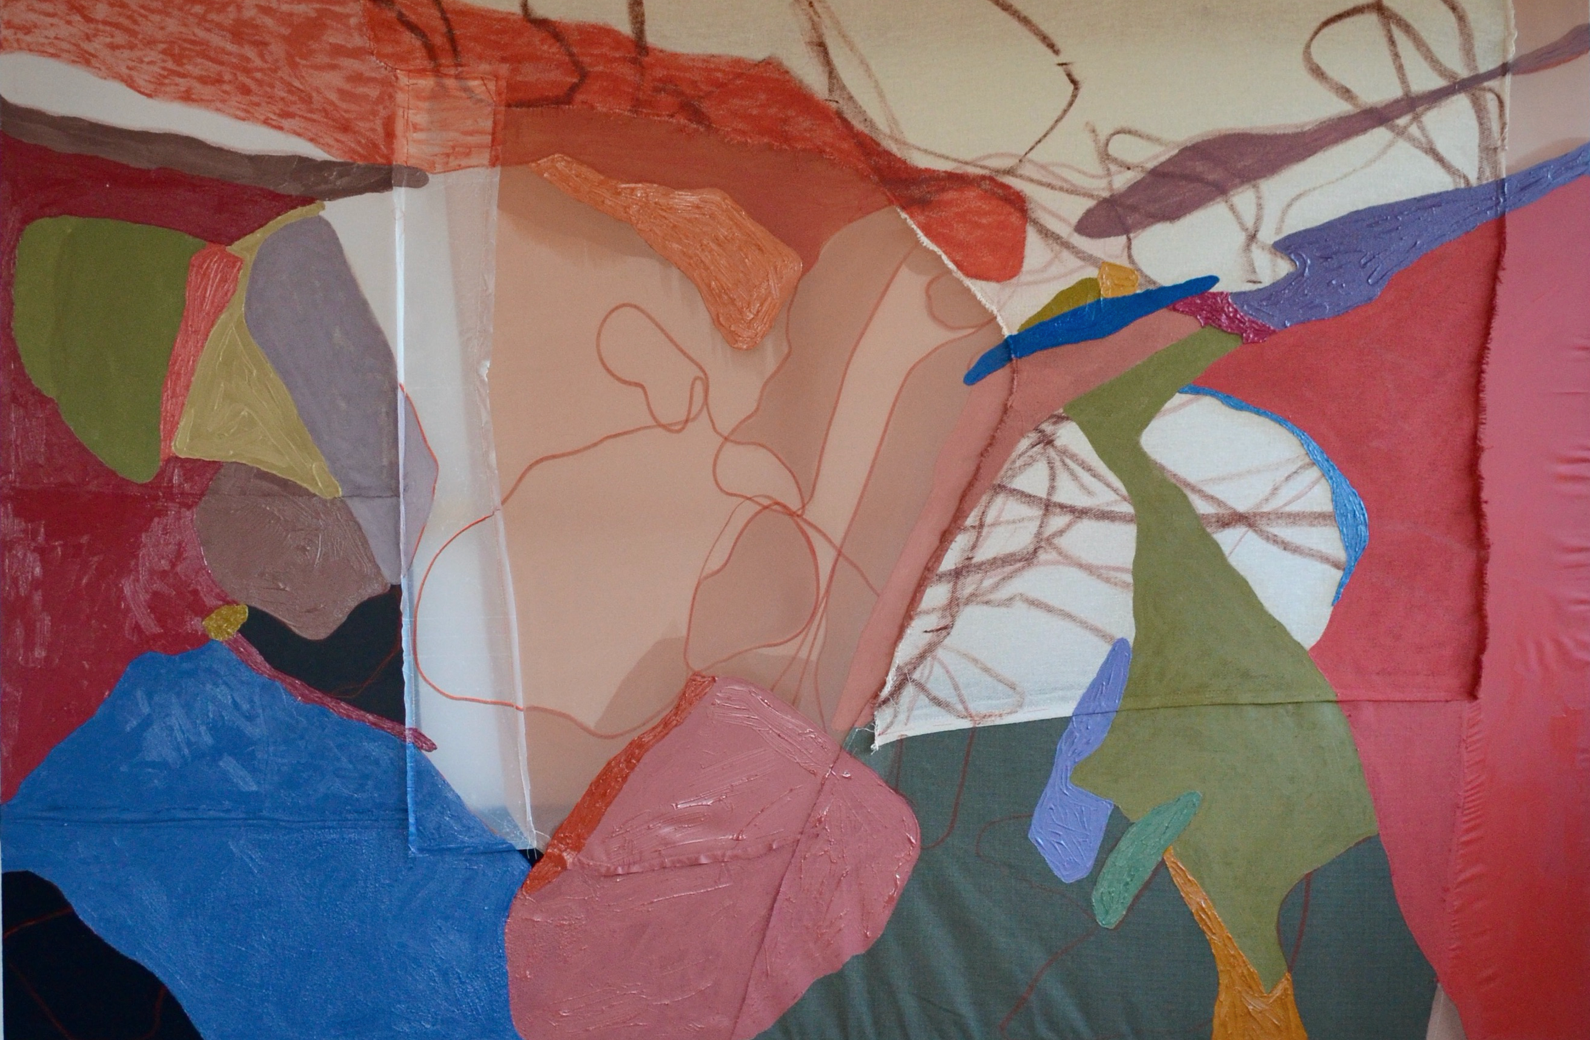 Untitled (Overlooking Loch Muik), Oil paint, oil pastel and encaustic medium on mixed materials, 183x125cm,  2020